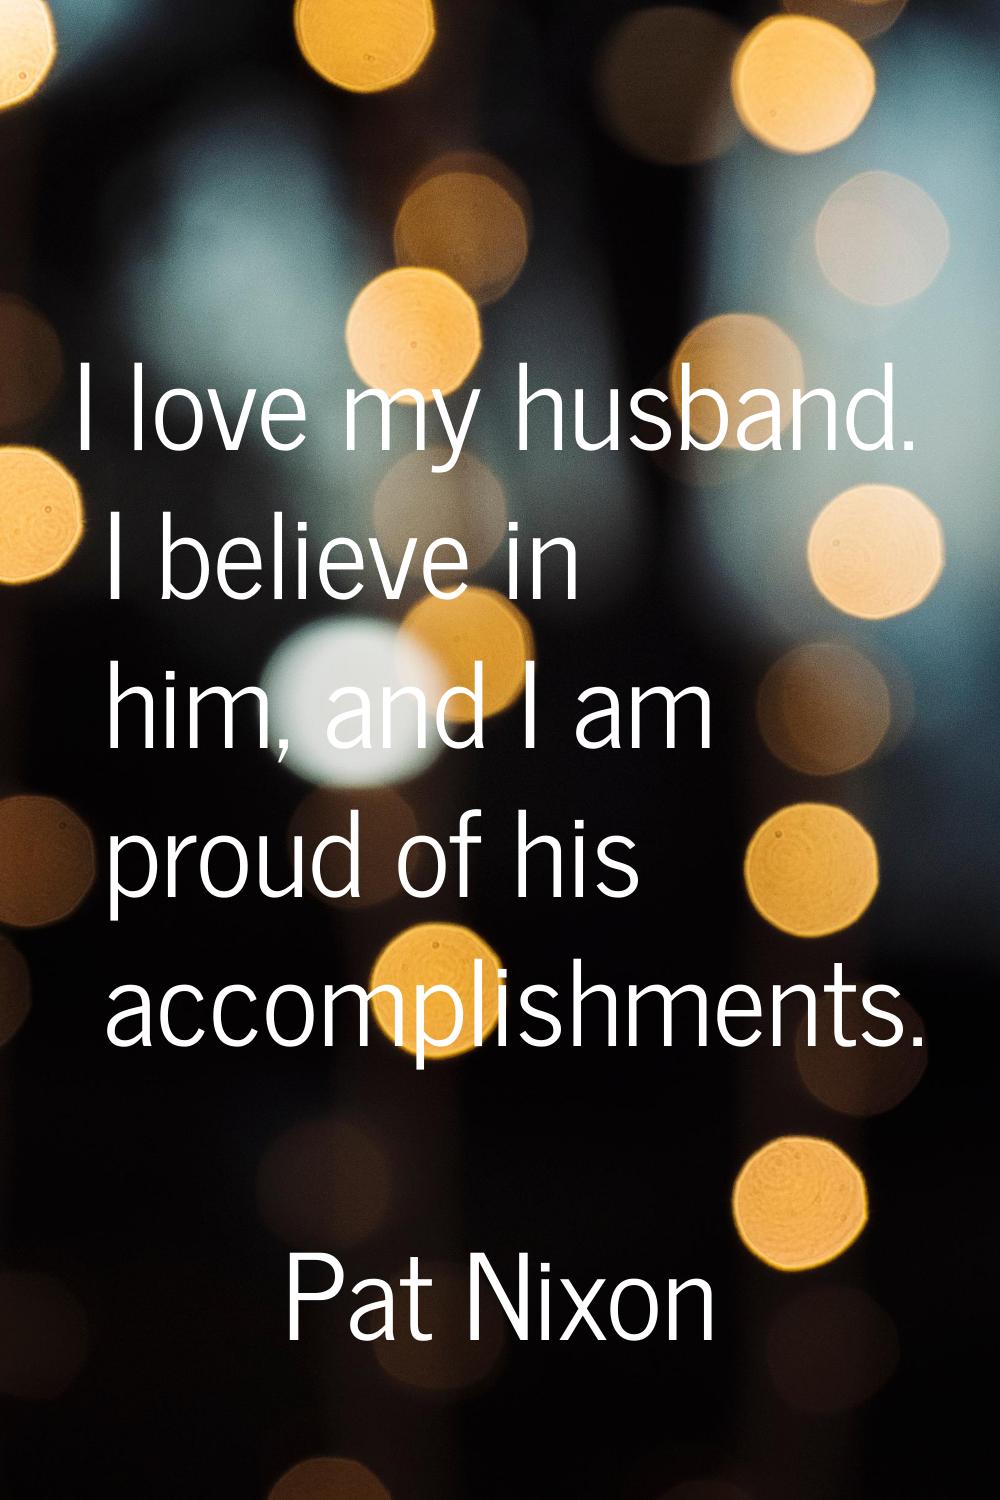 I love my husband. I believe in him, and I am proud of his accomplishments.